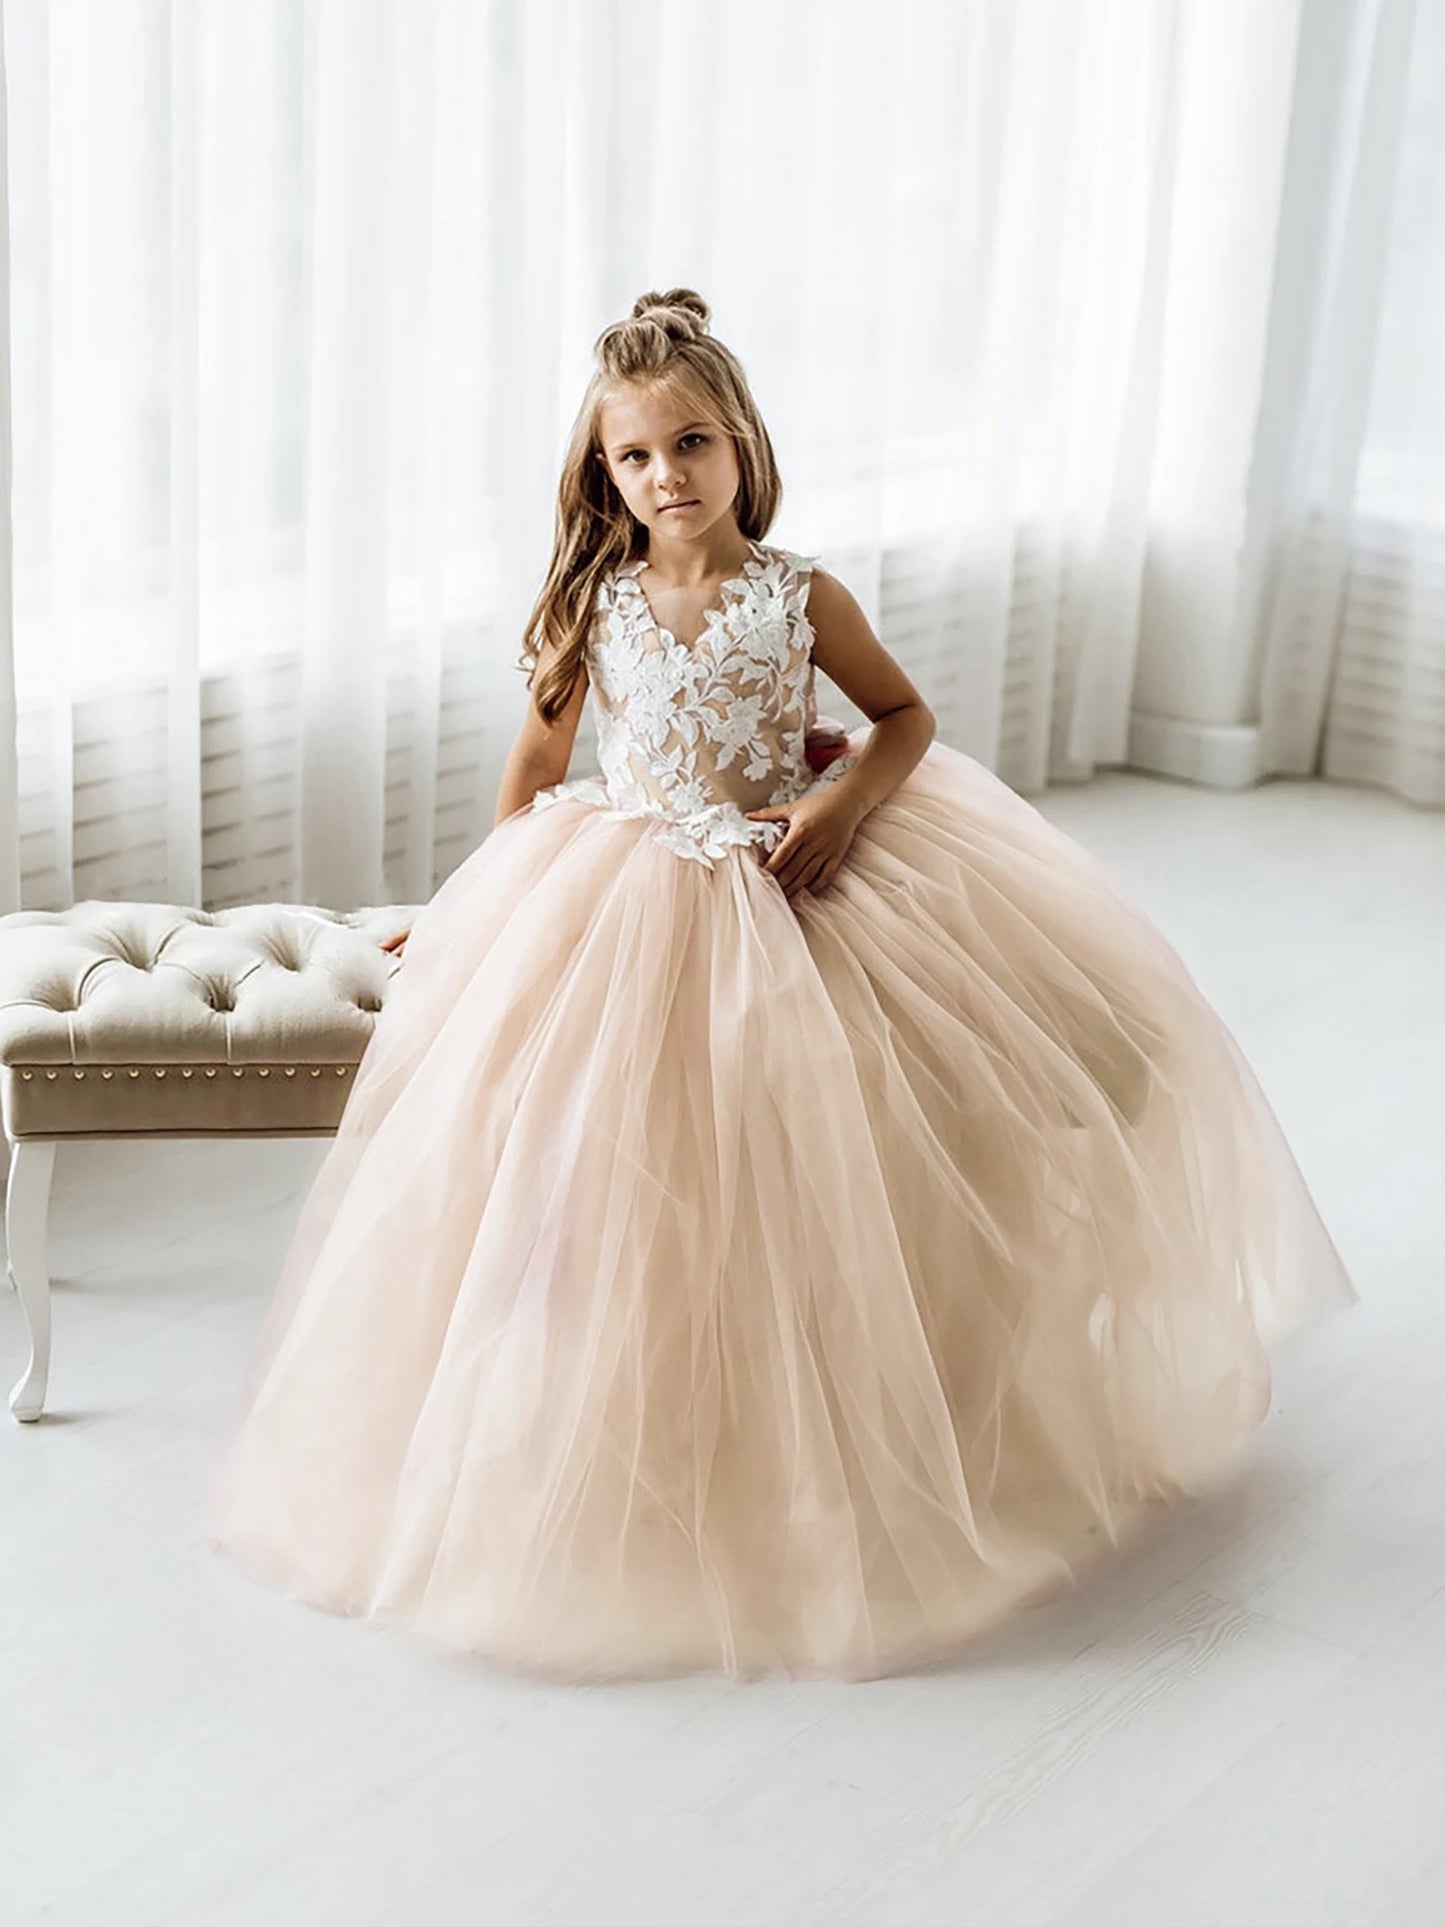 Sparkling White Princess Ball Gown Communion Dress With Train With Crystals  And Beading 2021 Formal Pageant Party Ggown With Lace Applique And First  Communion Dress AL5329 From Allloves, $114.79 | DHgate.Com